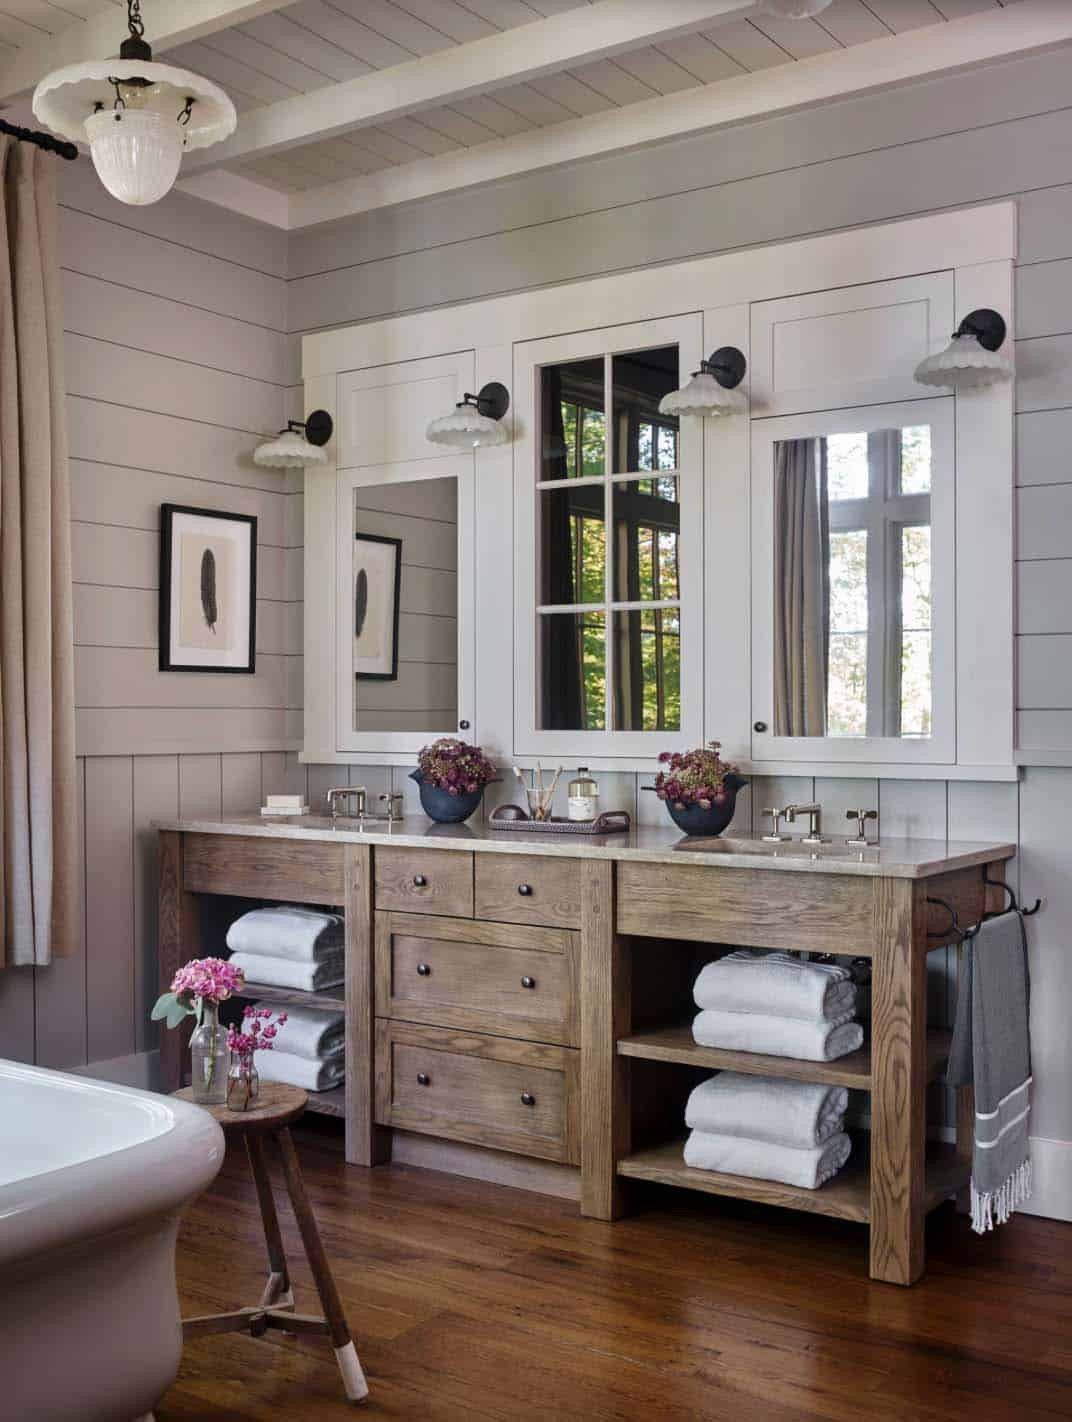 Lake Bathroom Decor
 Whimsical lakeside cottage retreat with cozy interiors on